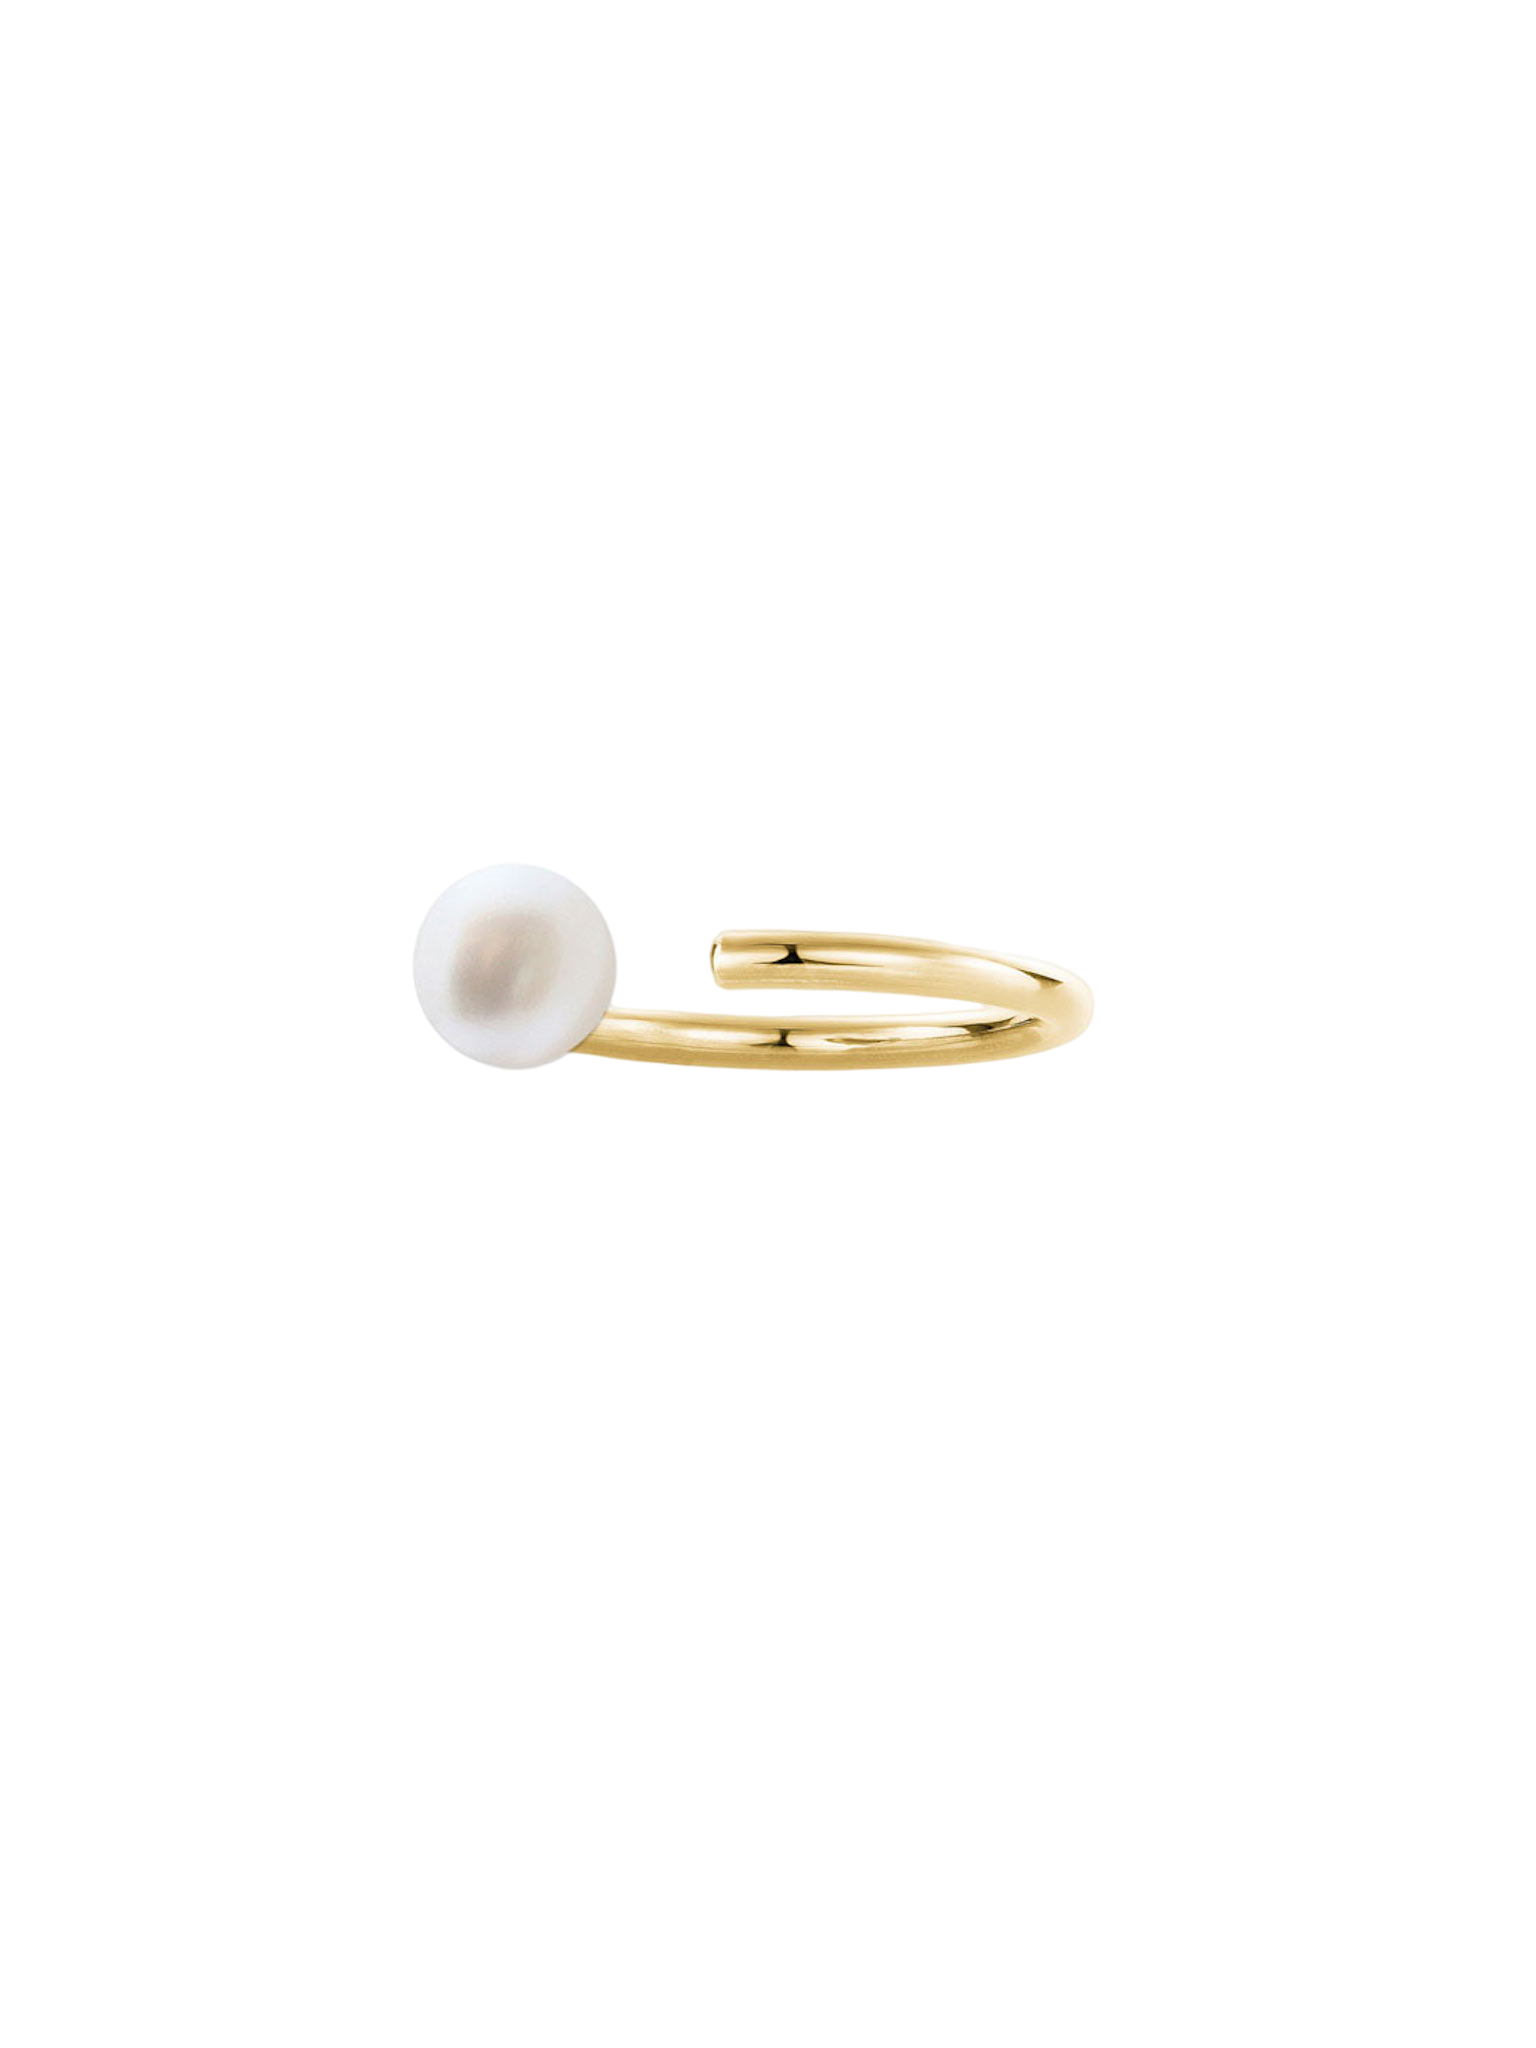 Pearl ring by Nayestones | Finematter